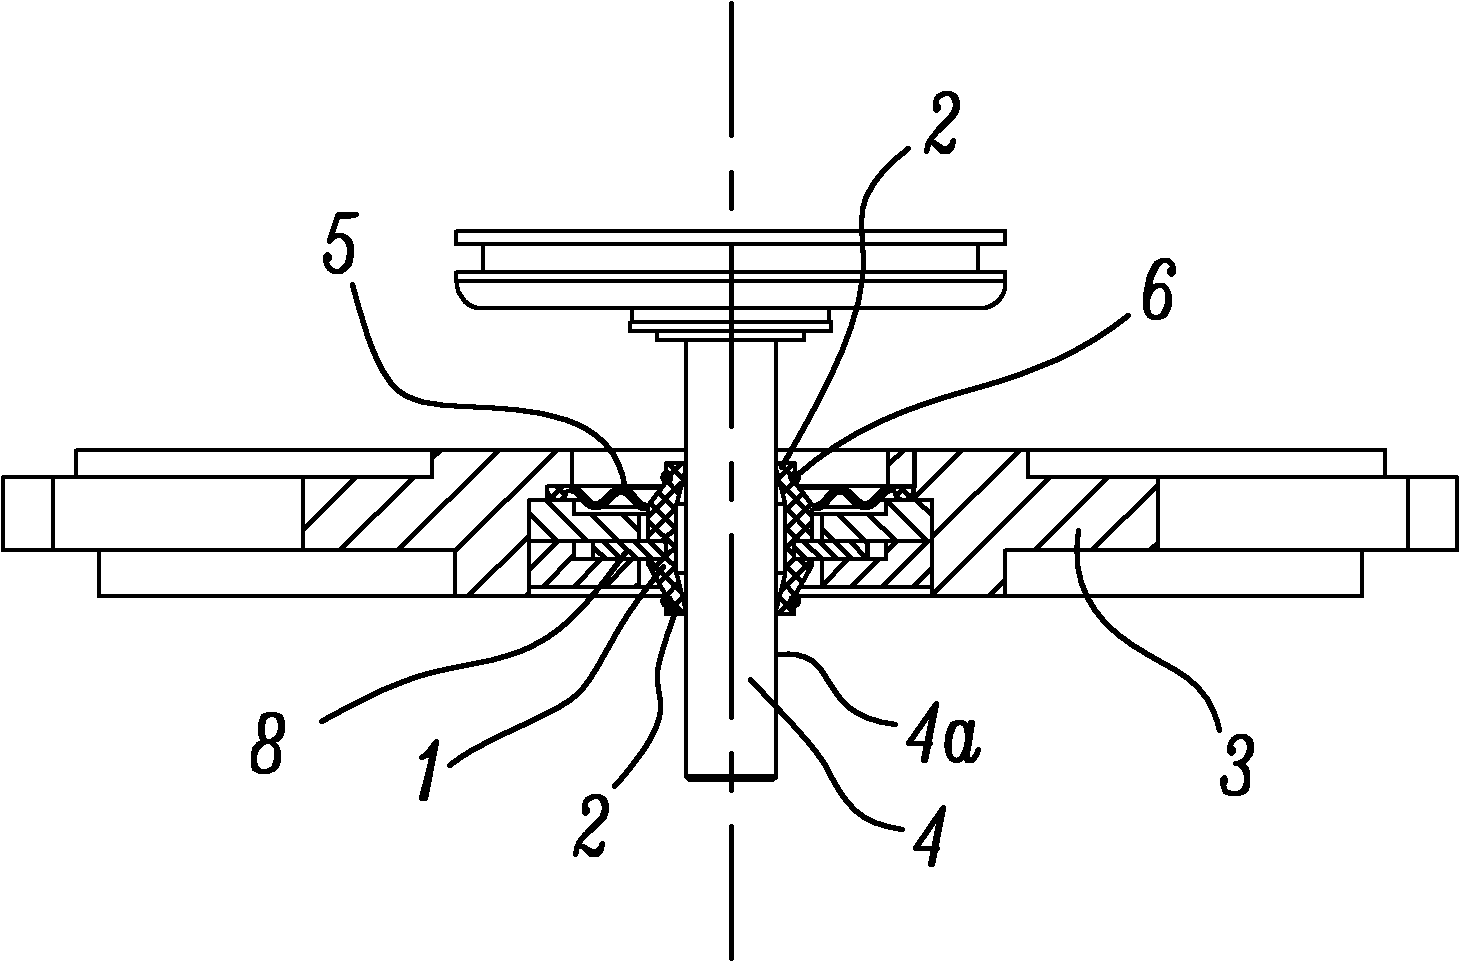 Reciprocating oil seal structure of compressor